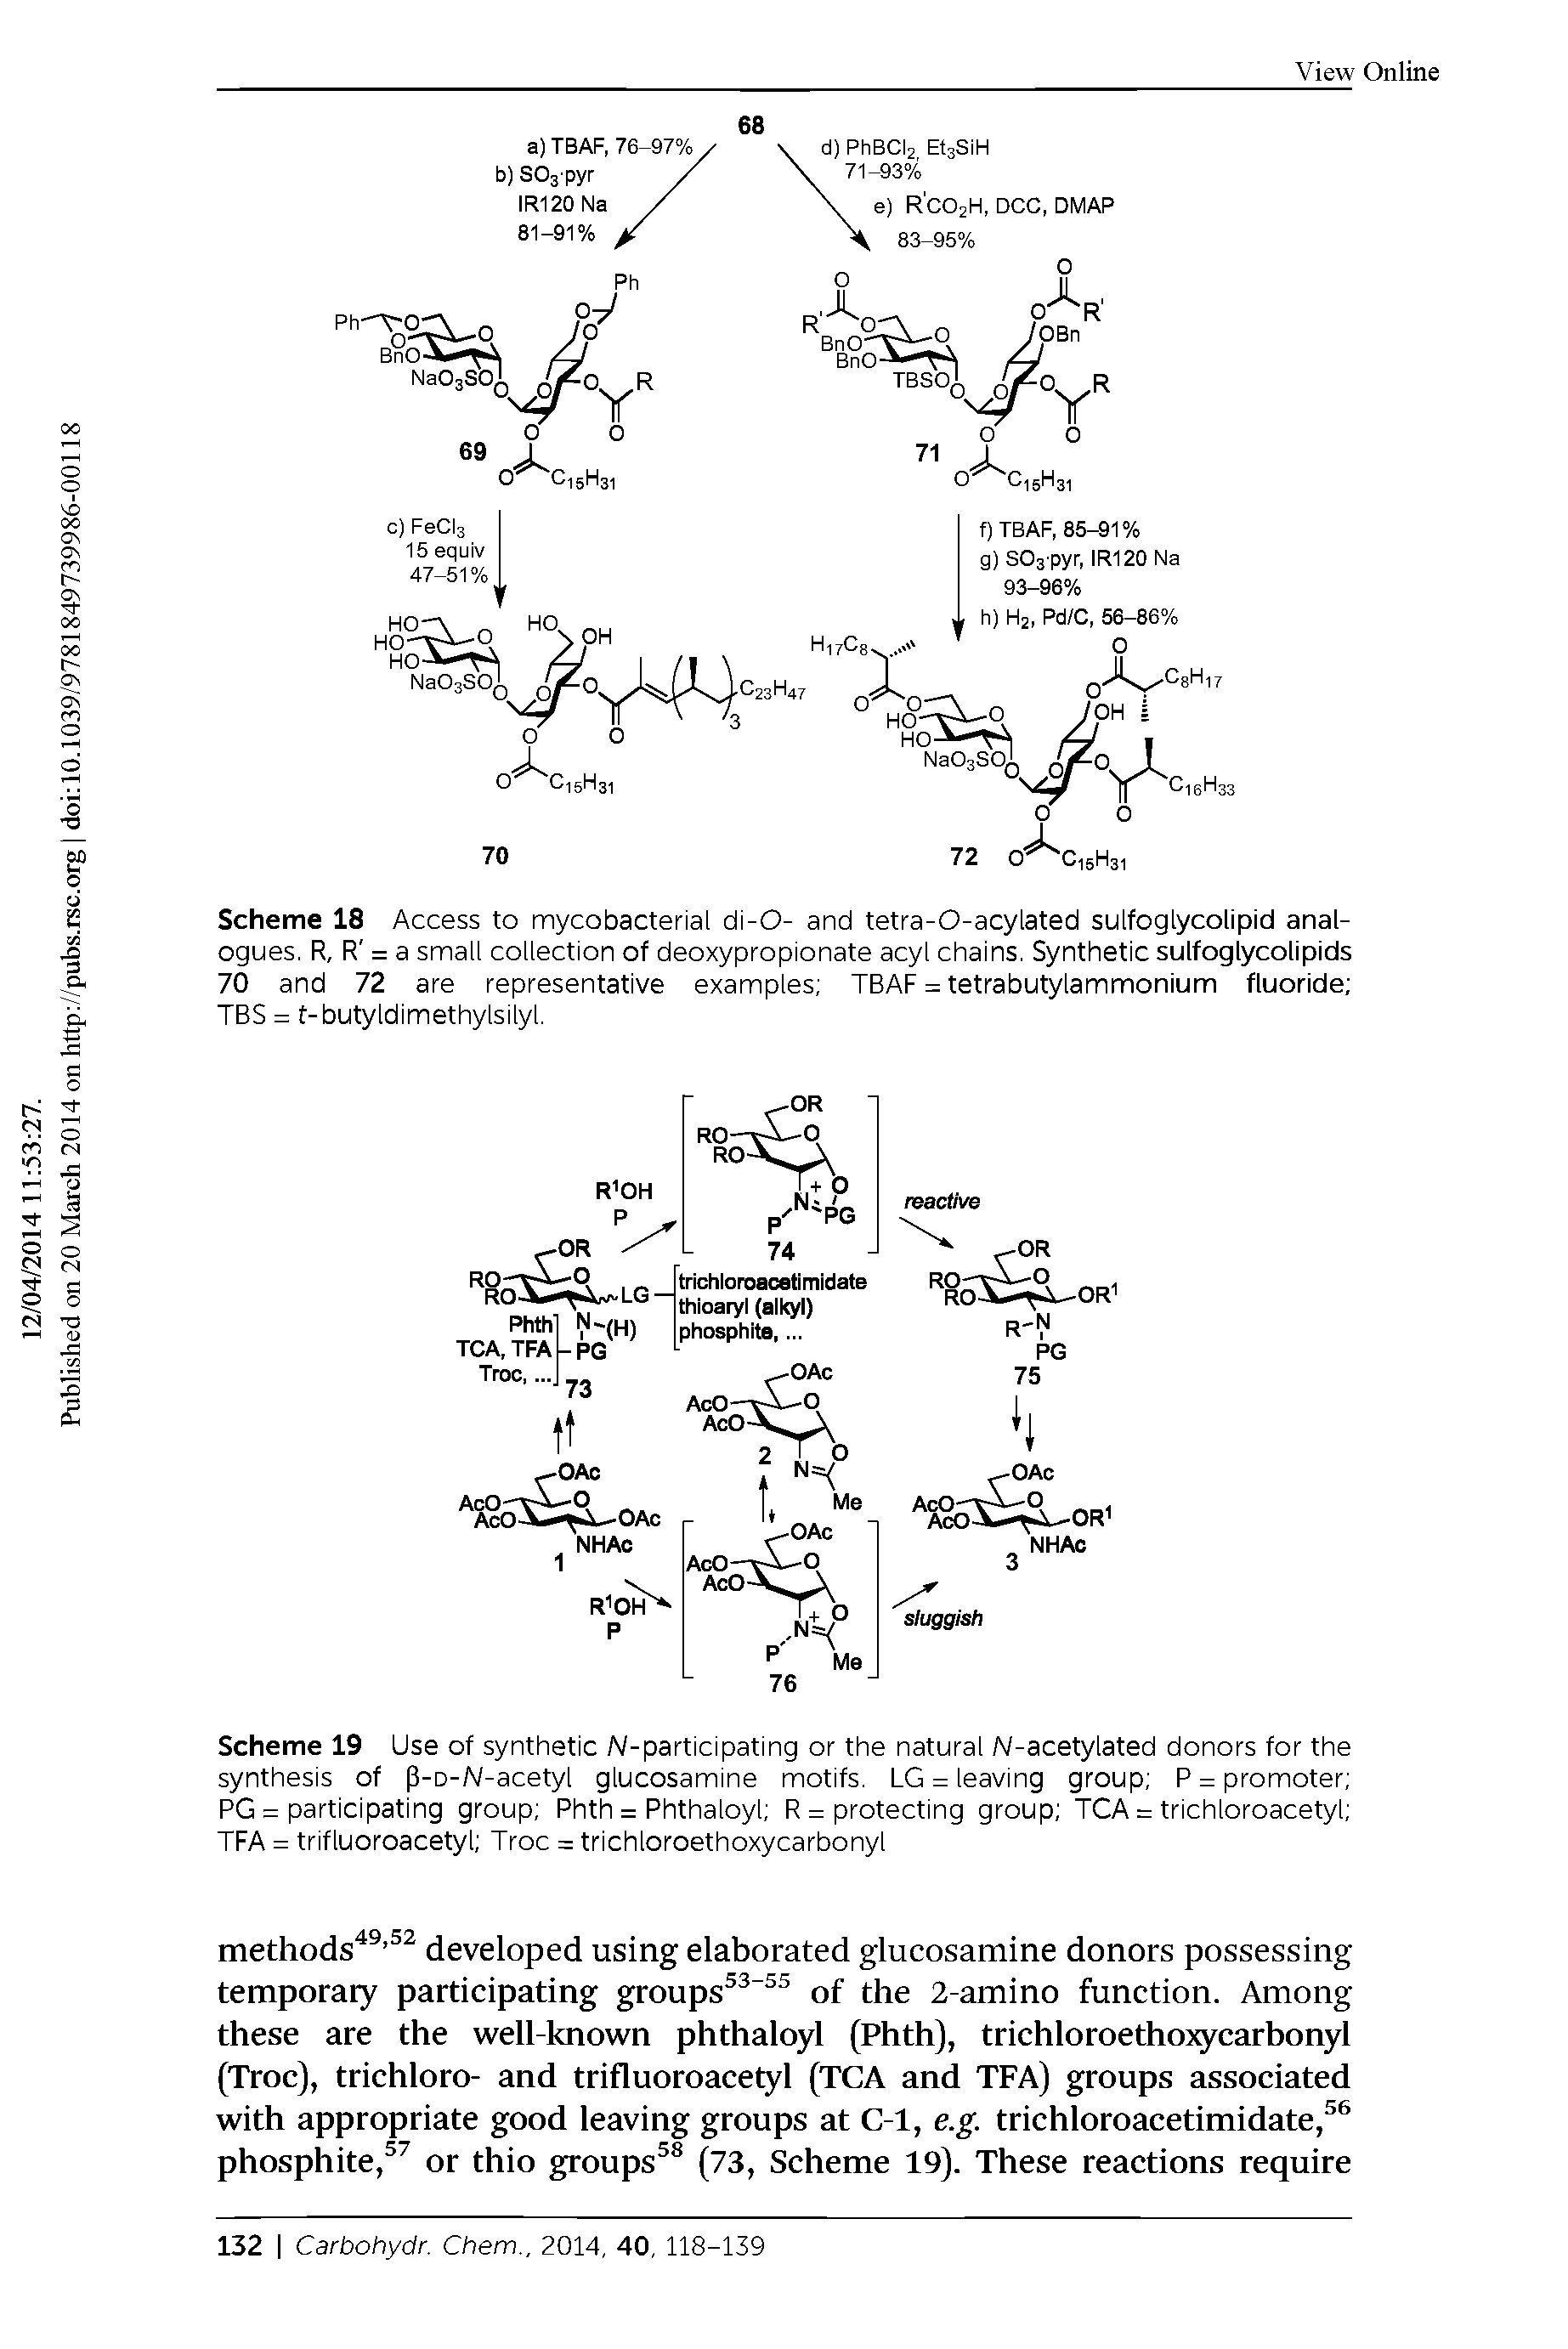 Scheme 19 Use of synthetic -participating or the natural N-acetylated donors for the synthesis of p-o-N-acetyl glucosamine motifs. LG = leaving group P = promoter PG = participating group Phth = Phthaloyl R = protecting group TCA = trichloroacetyl TFA = trifluoroacetyl Troc = trichloroethoxycarbonyl...